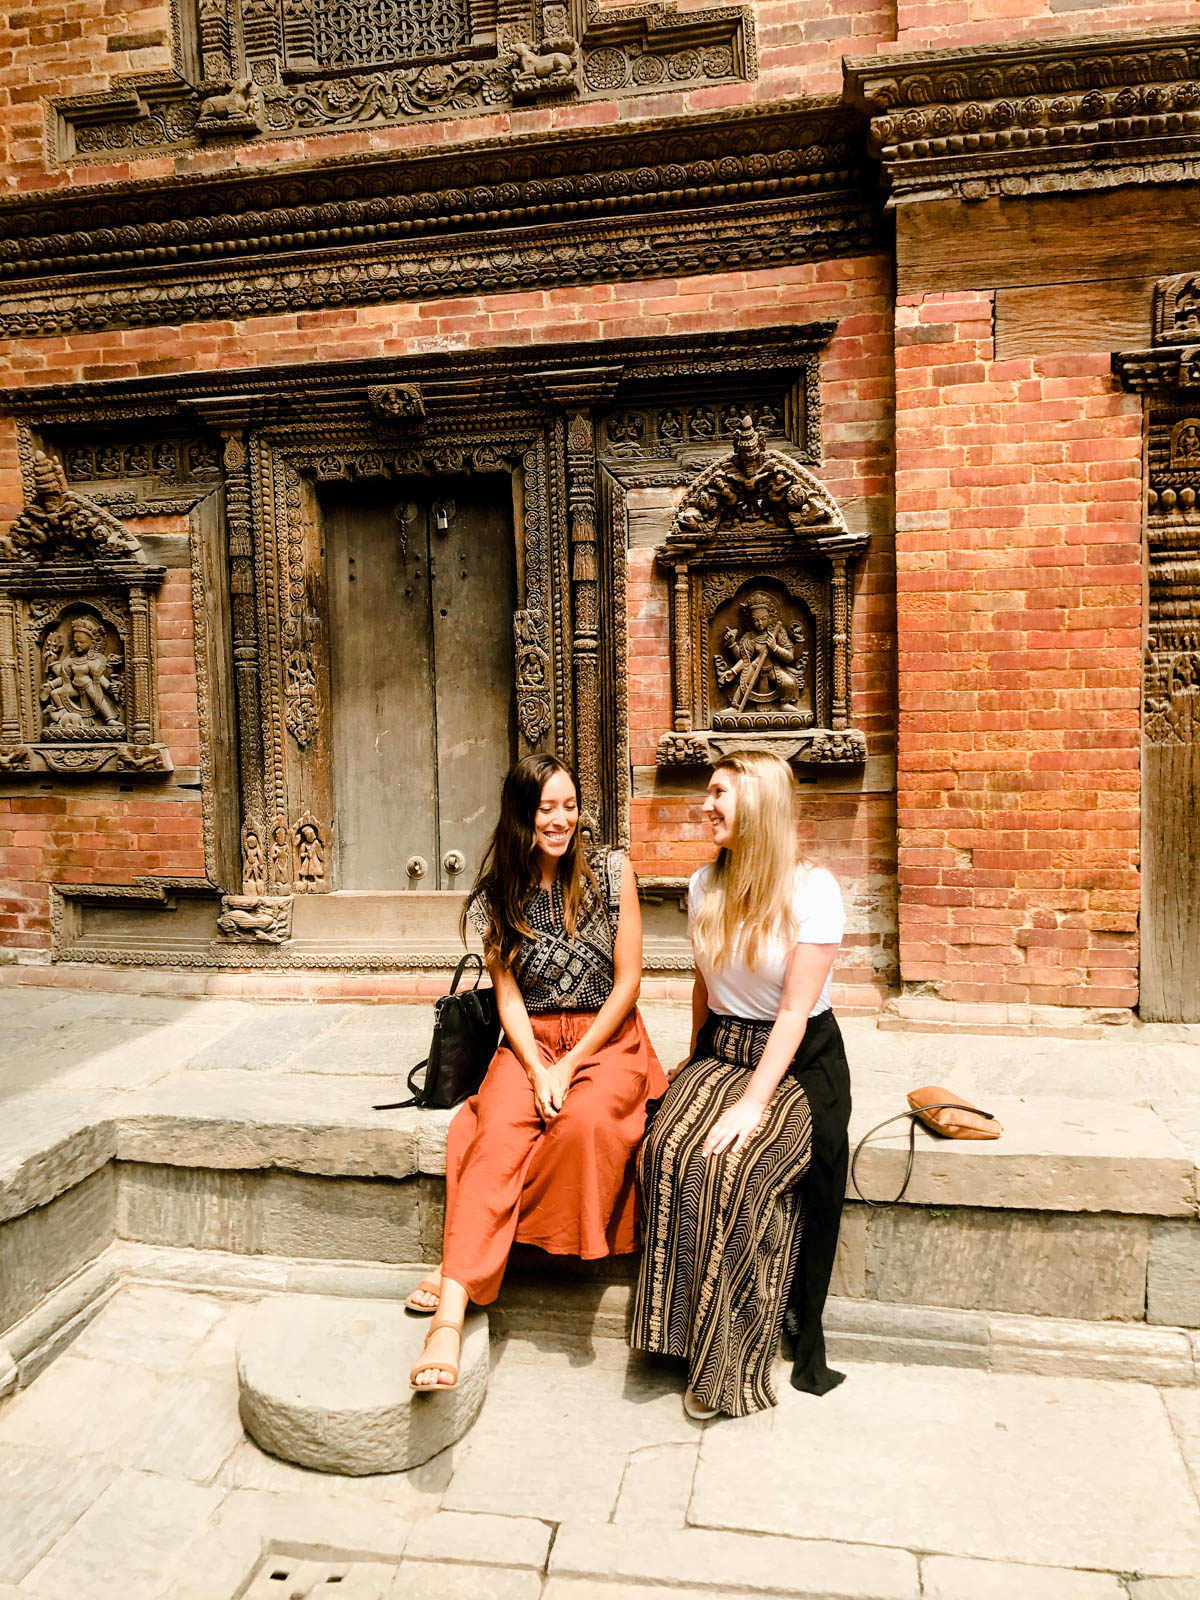 Kathmandu is equal parts intoxicating and exhausting — the people, the foods, the traffic and temples make for an overwhelming and oh-so exciting experience! This is our list of absolute must-do’s while visiting Kathmandu!